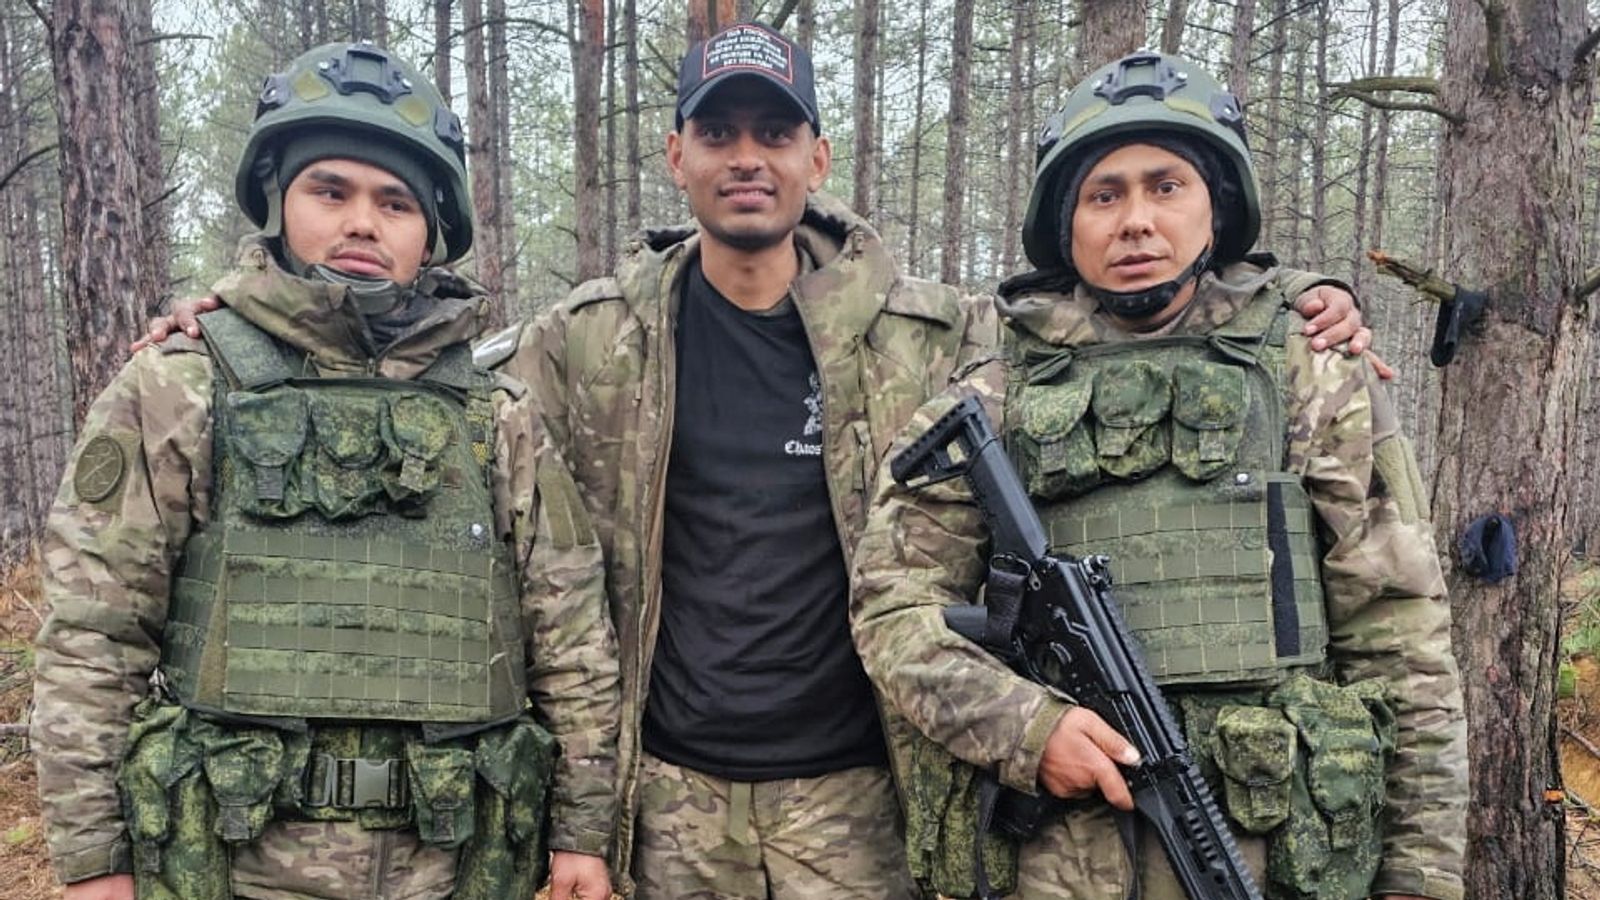 indians tricked by promise of work in russia, die fighting in ukraine, investigators say